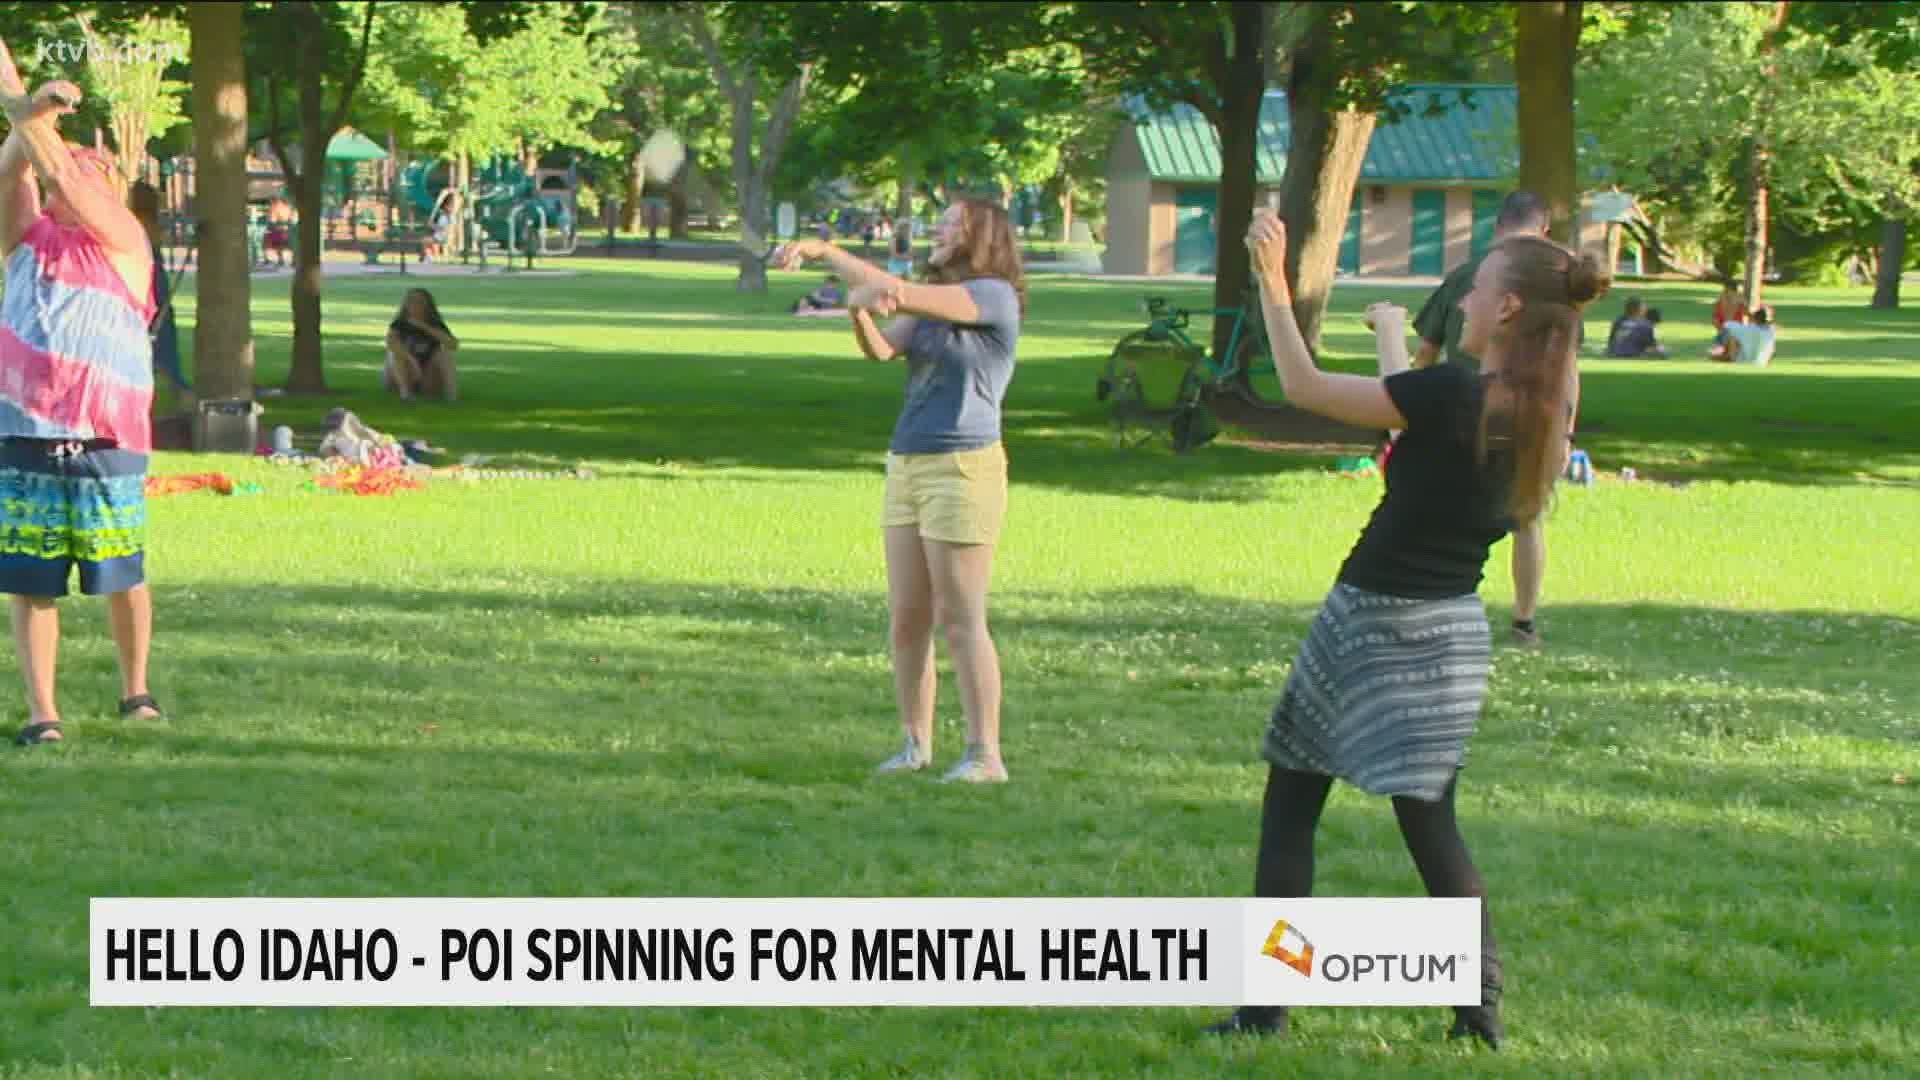 Boise therapist Julie Meeks says poi spinning has multiple physical and mental health benefits.